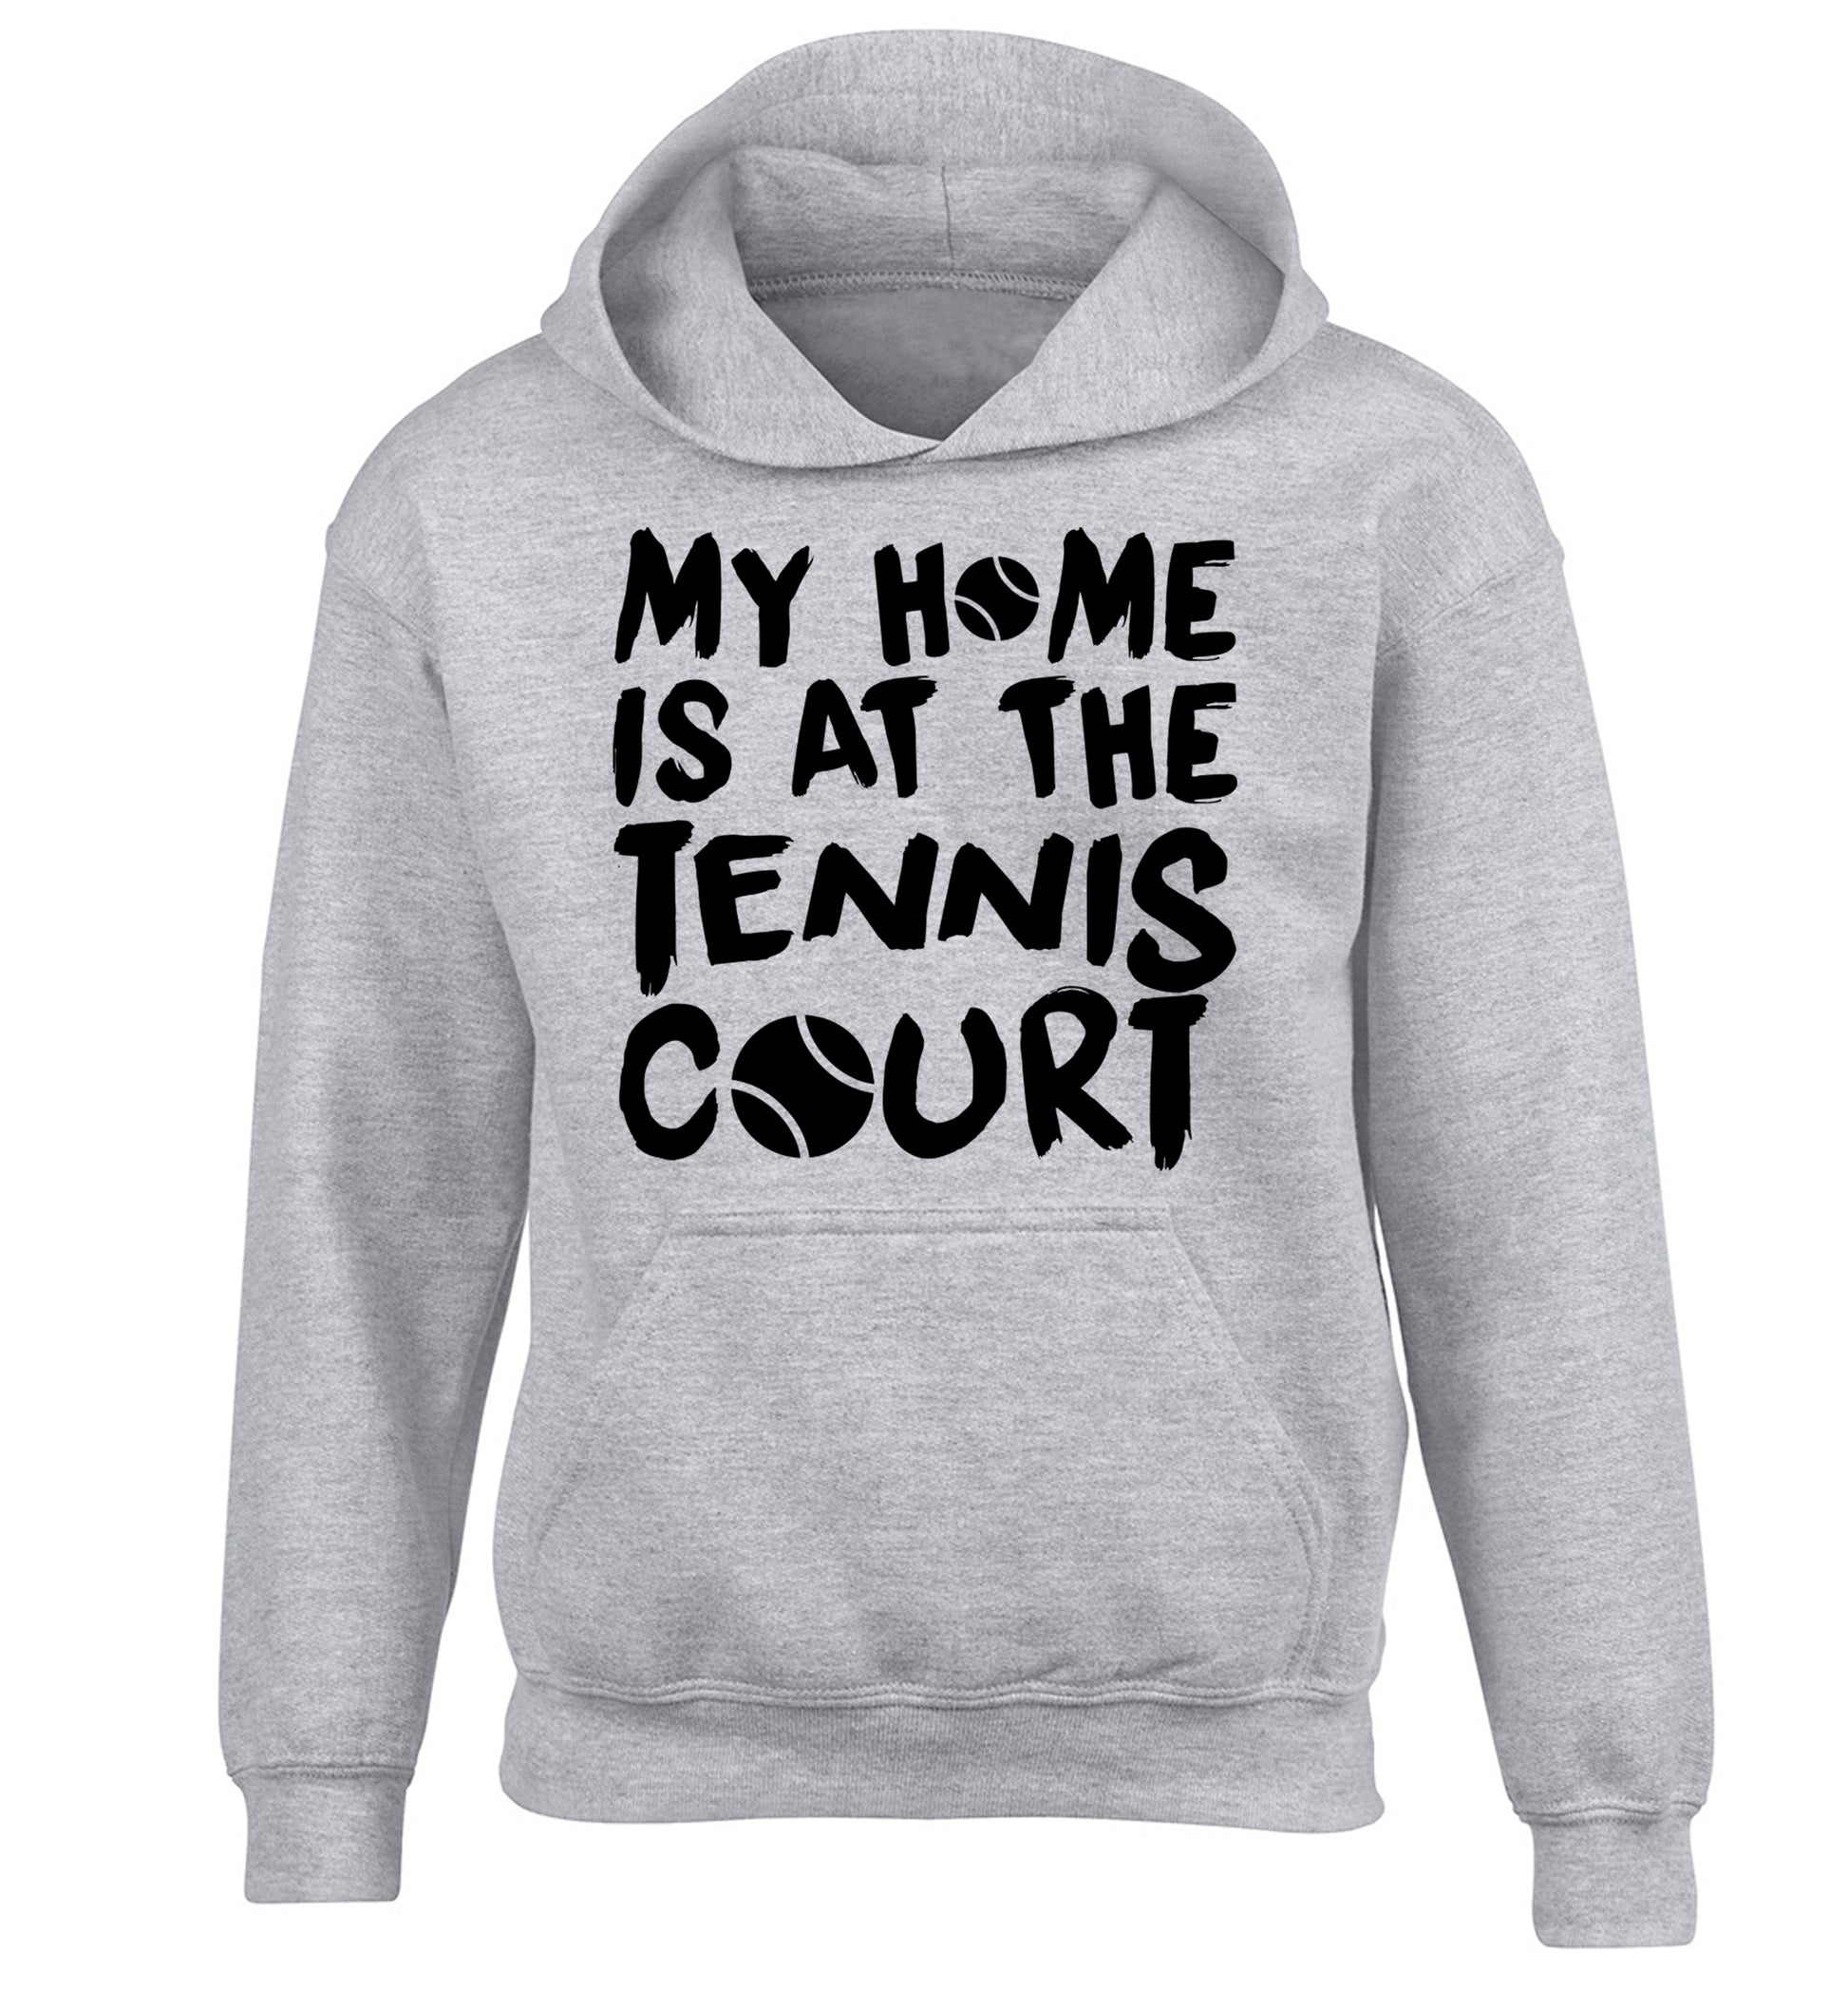 My home is at the tennis court children's grey hoodie 12-14 Years